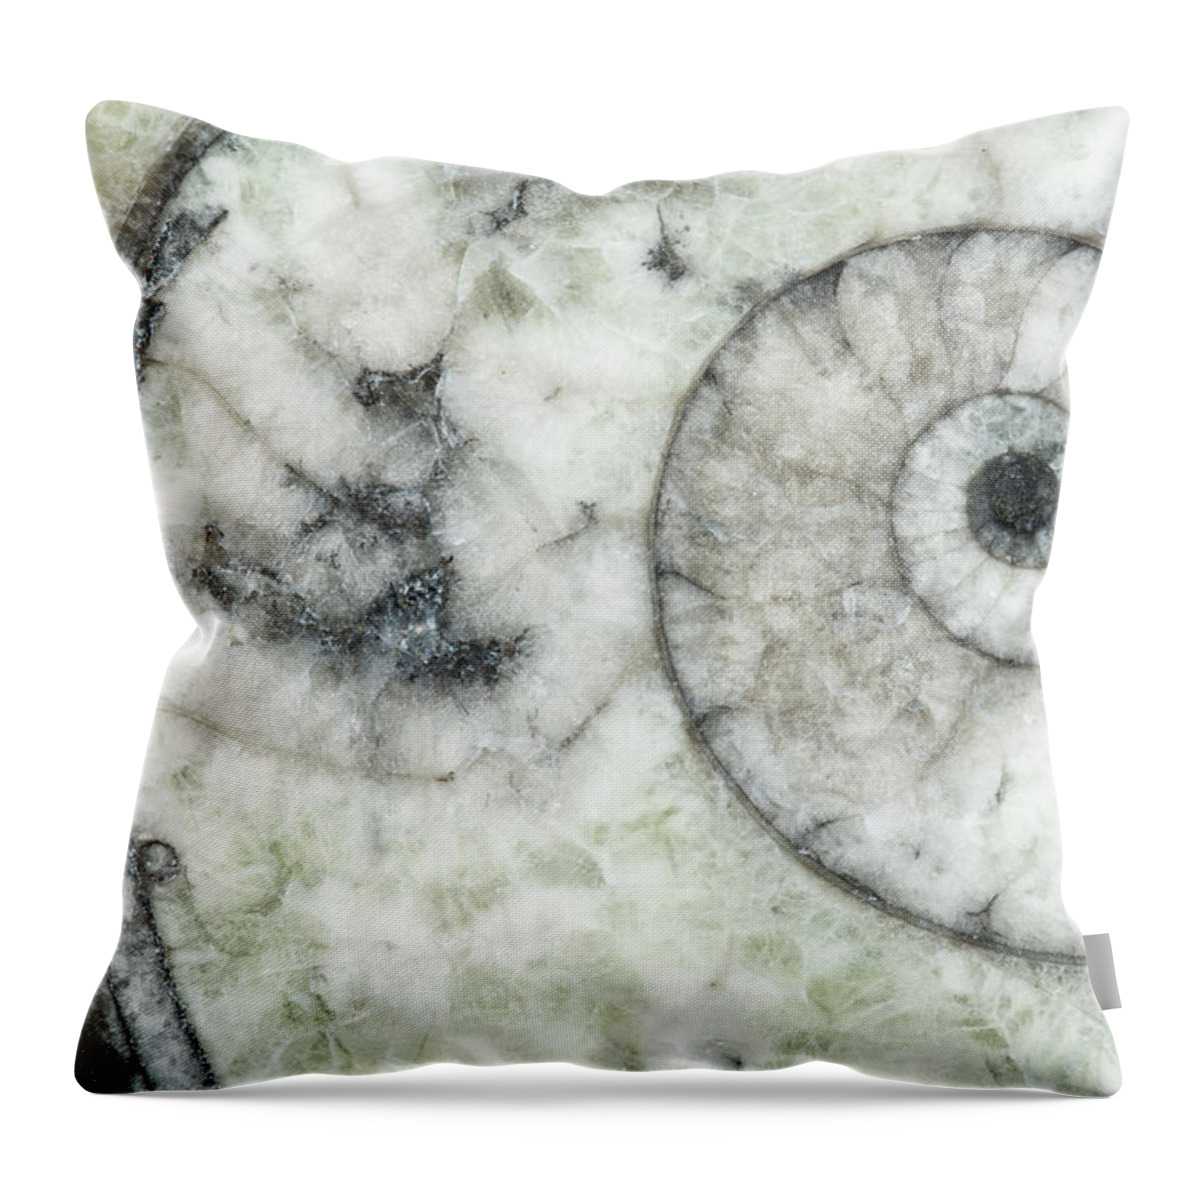 Abstract Throw Pillow featuring the photograph Goniatite Fossil, Close by Mark Windom